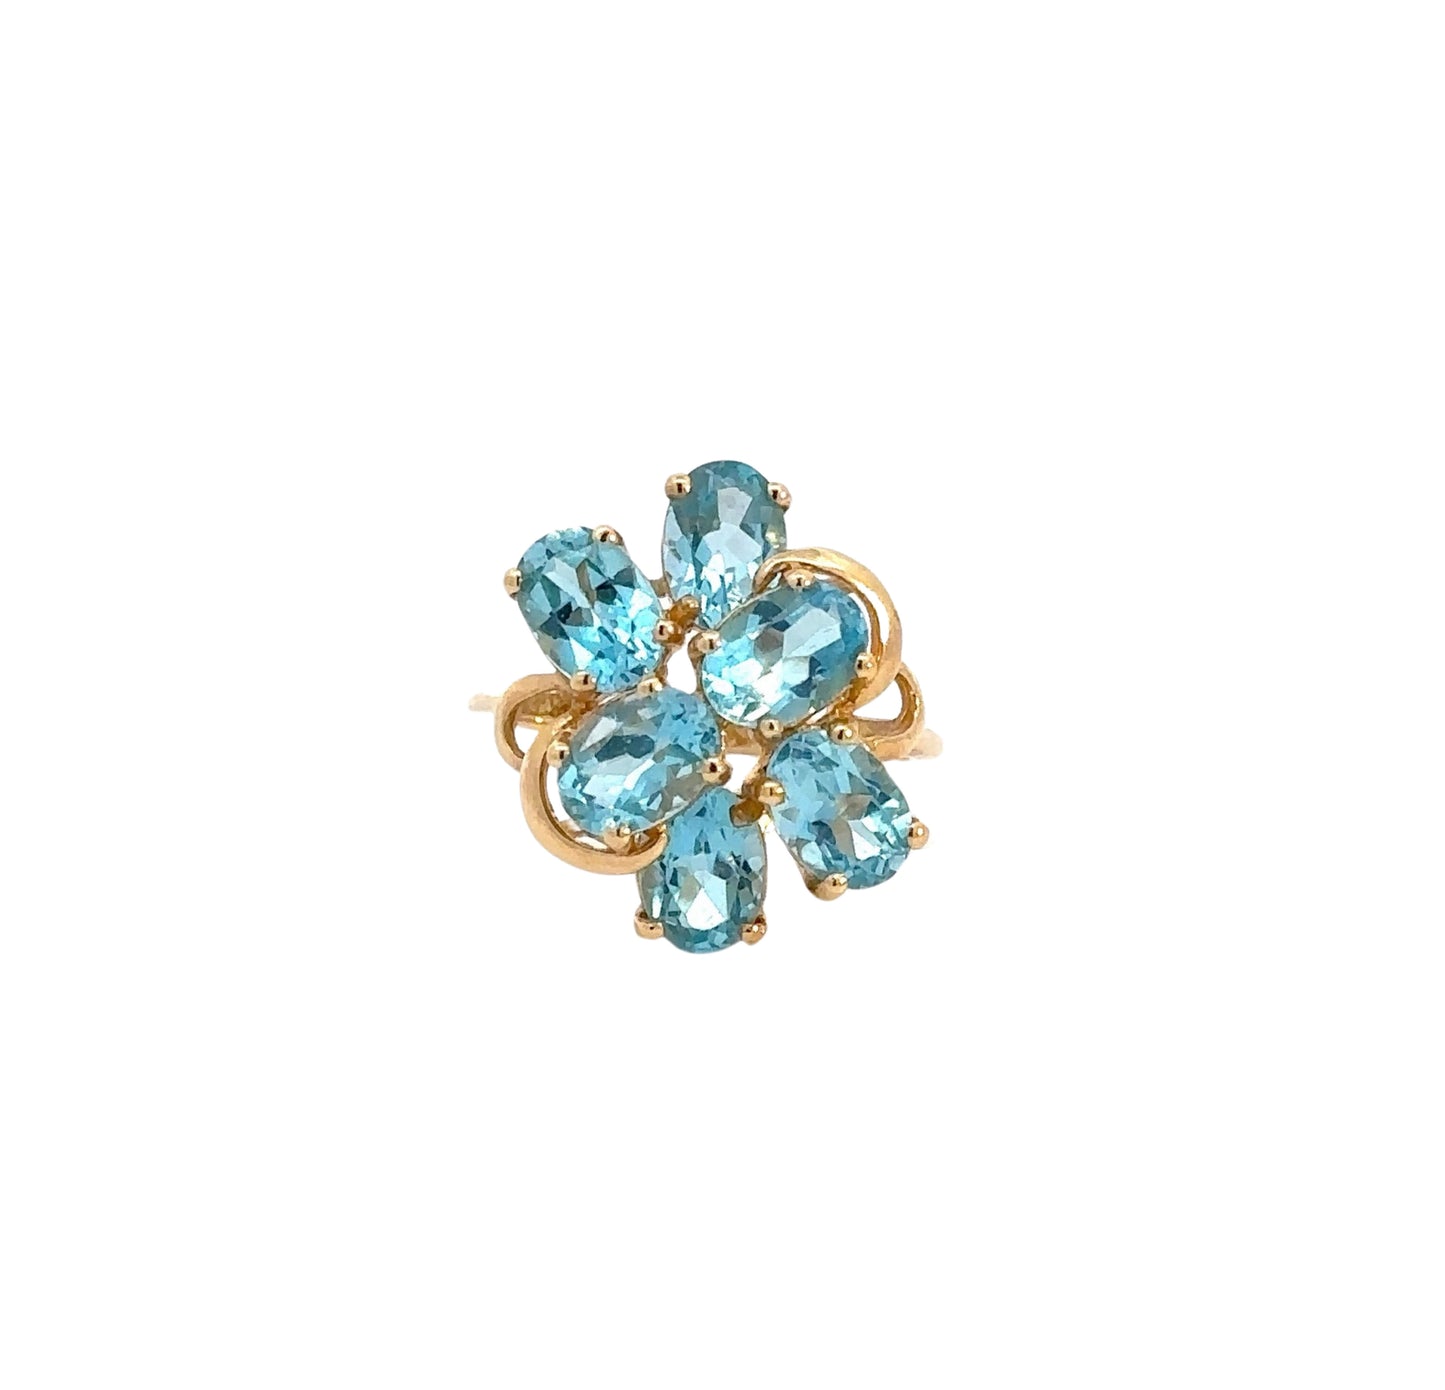 Front of yellow gold ring with 6 oval-shaped blue gemstones